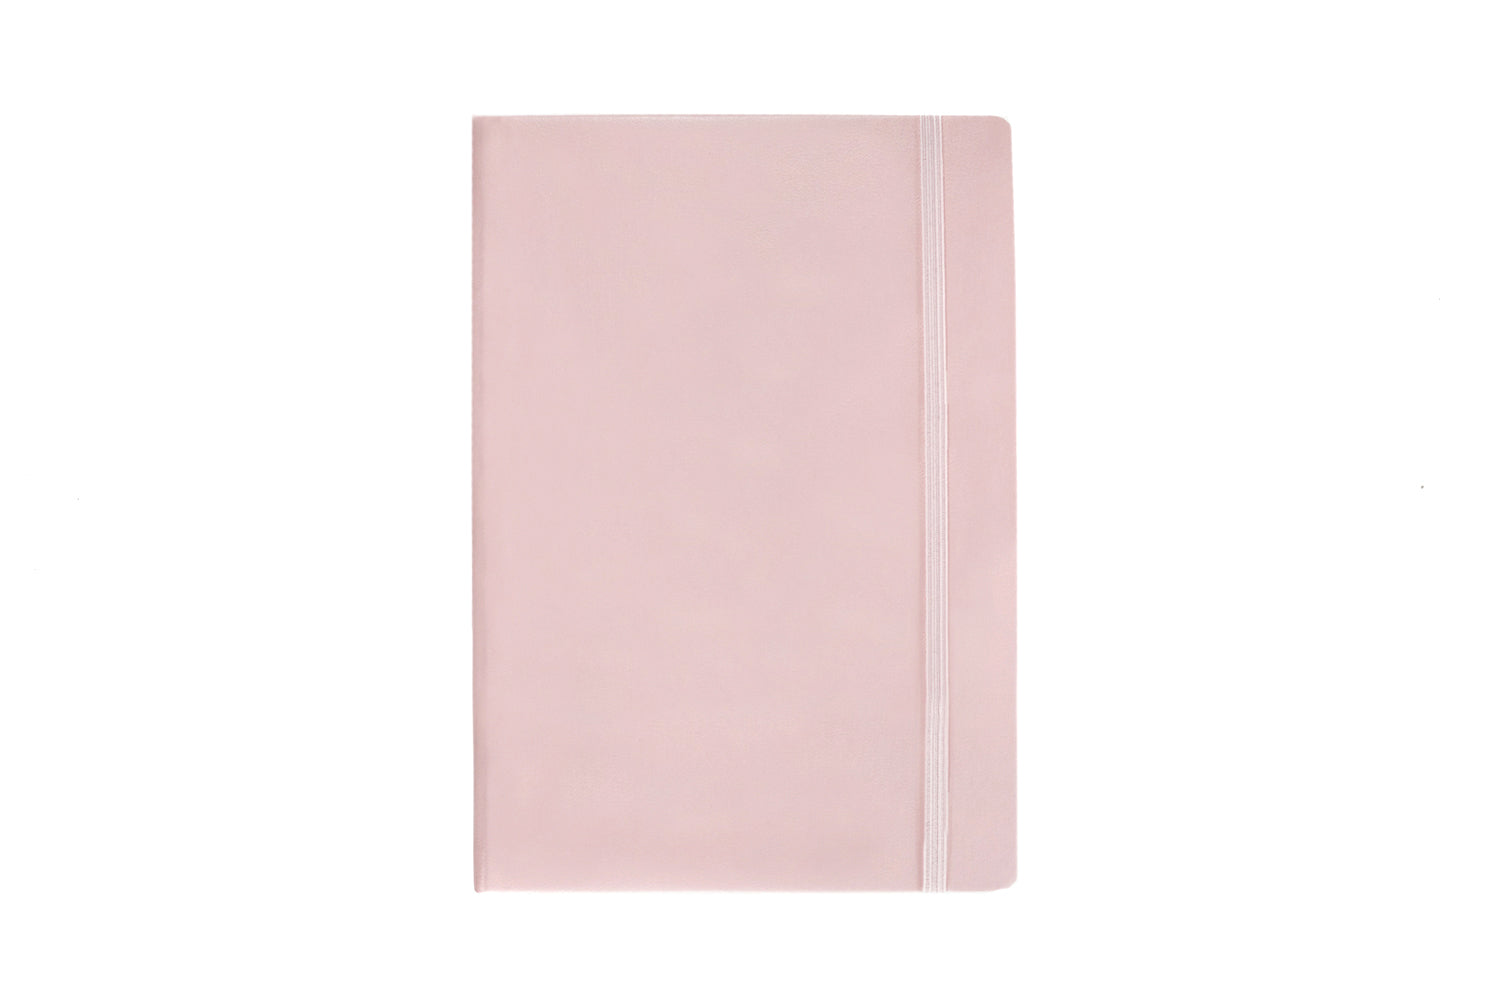 Leuchtturm1917 Medium Hard Cover Notebook, Muted Colours - Dotted Paper